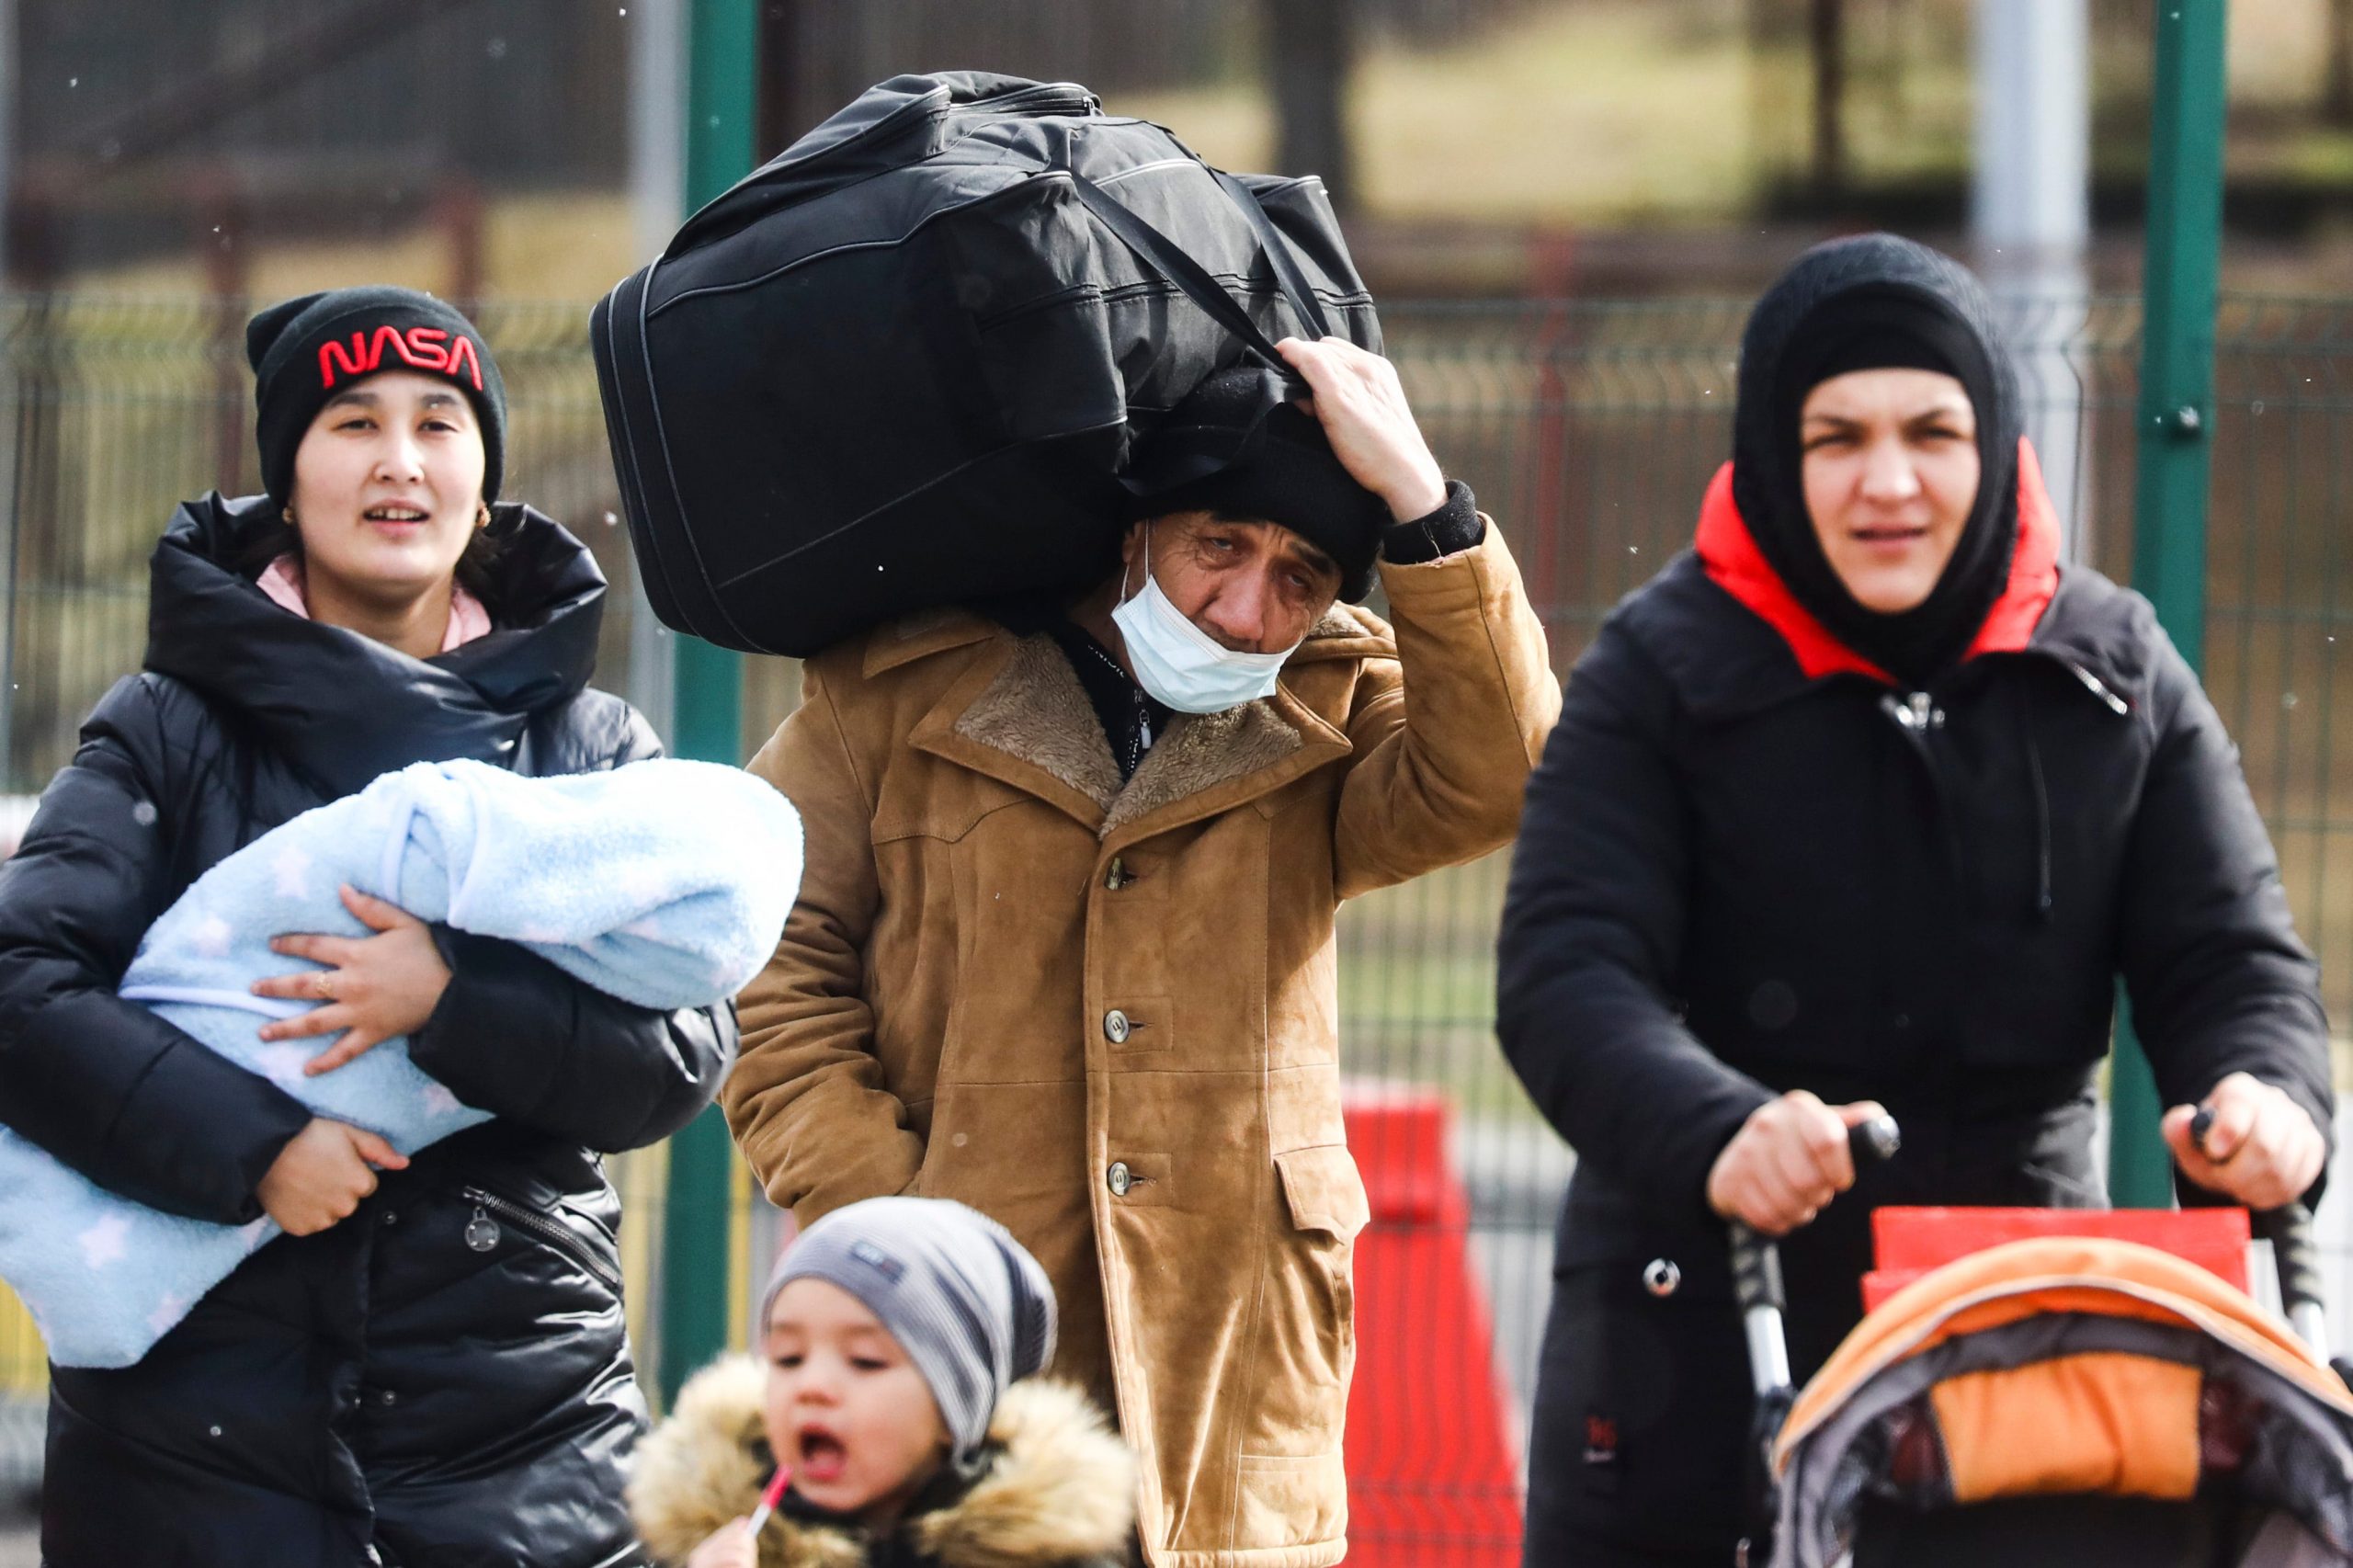 People with bags and luggage fleeing from Ukraine are seen after crossing Ukrainian-Polish border due to Russian military attack on Ukraine.